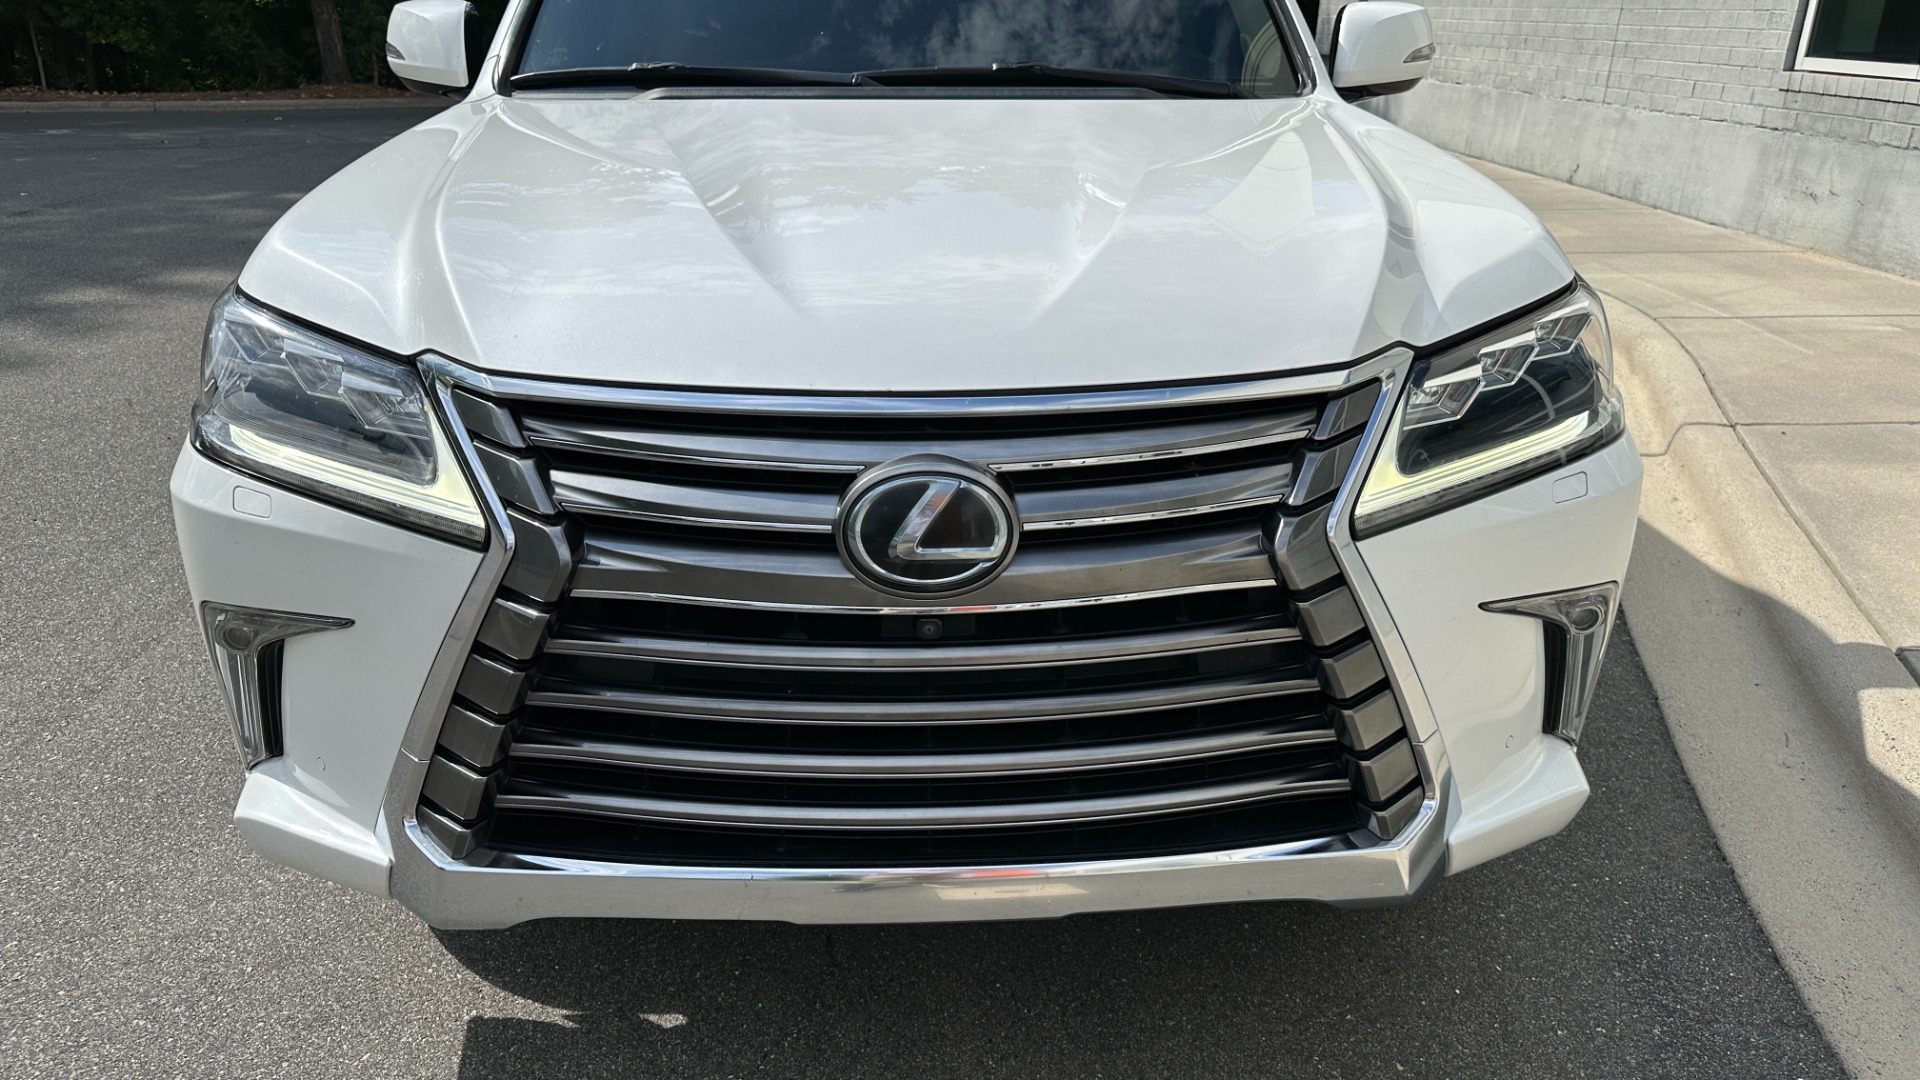 Used 2017 Lexus LX LX 570 LUXURY / MARK LEVINSON / REAR DVD SCREENS / 3 ROW / 4WD for sale $46,995 at Formula Imports in Charlotte NC 28227 8